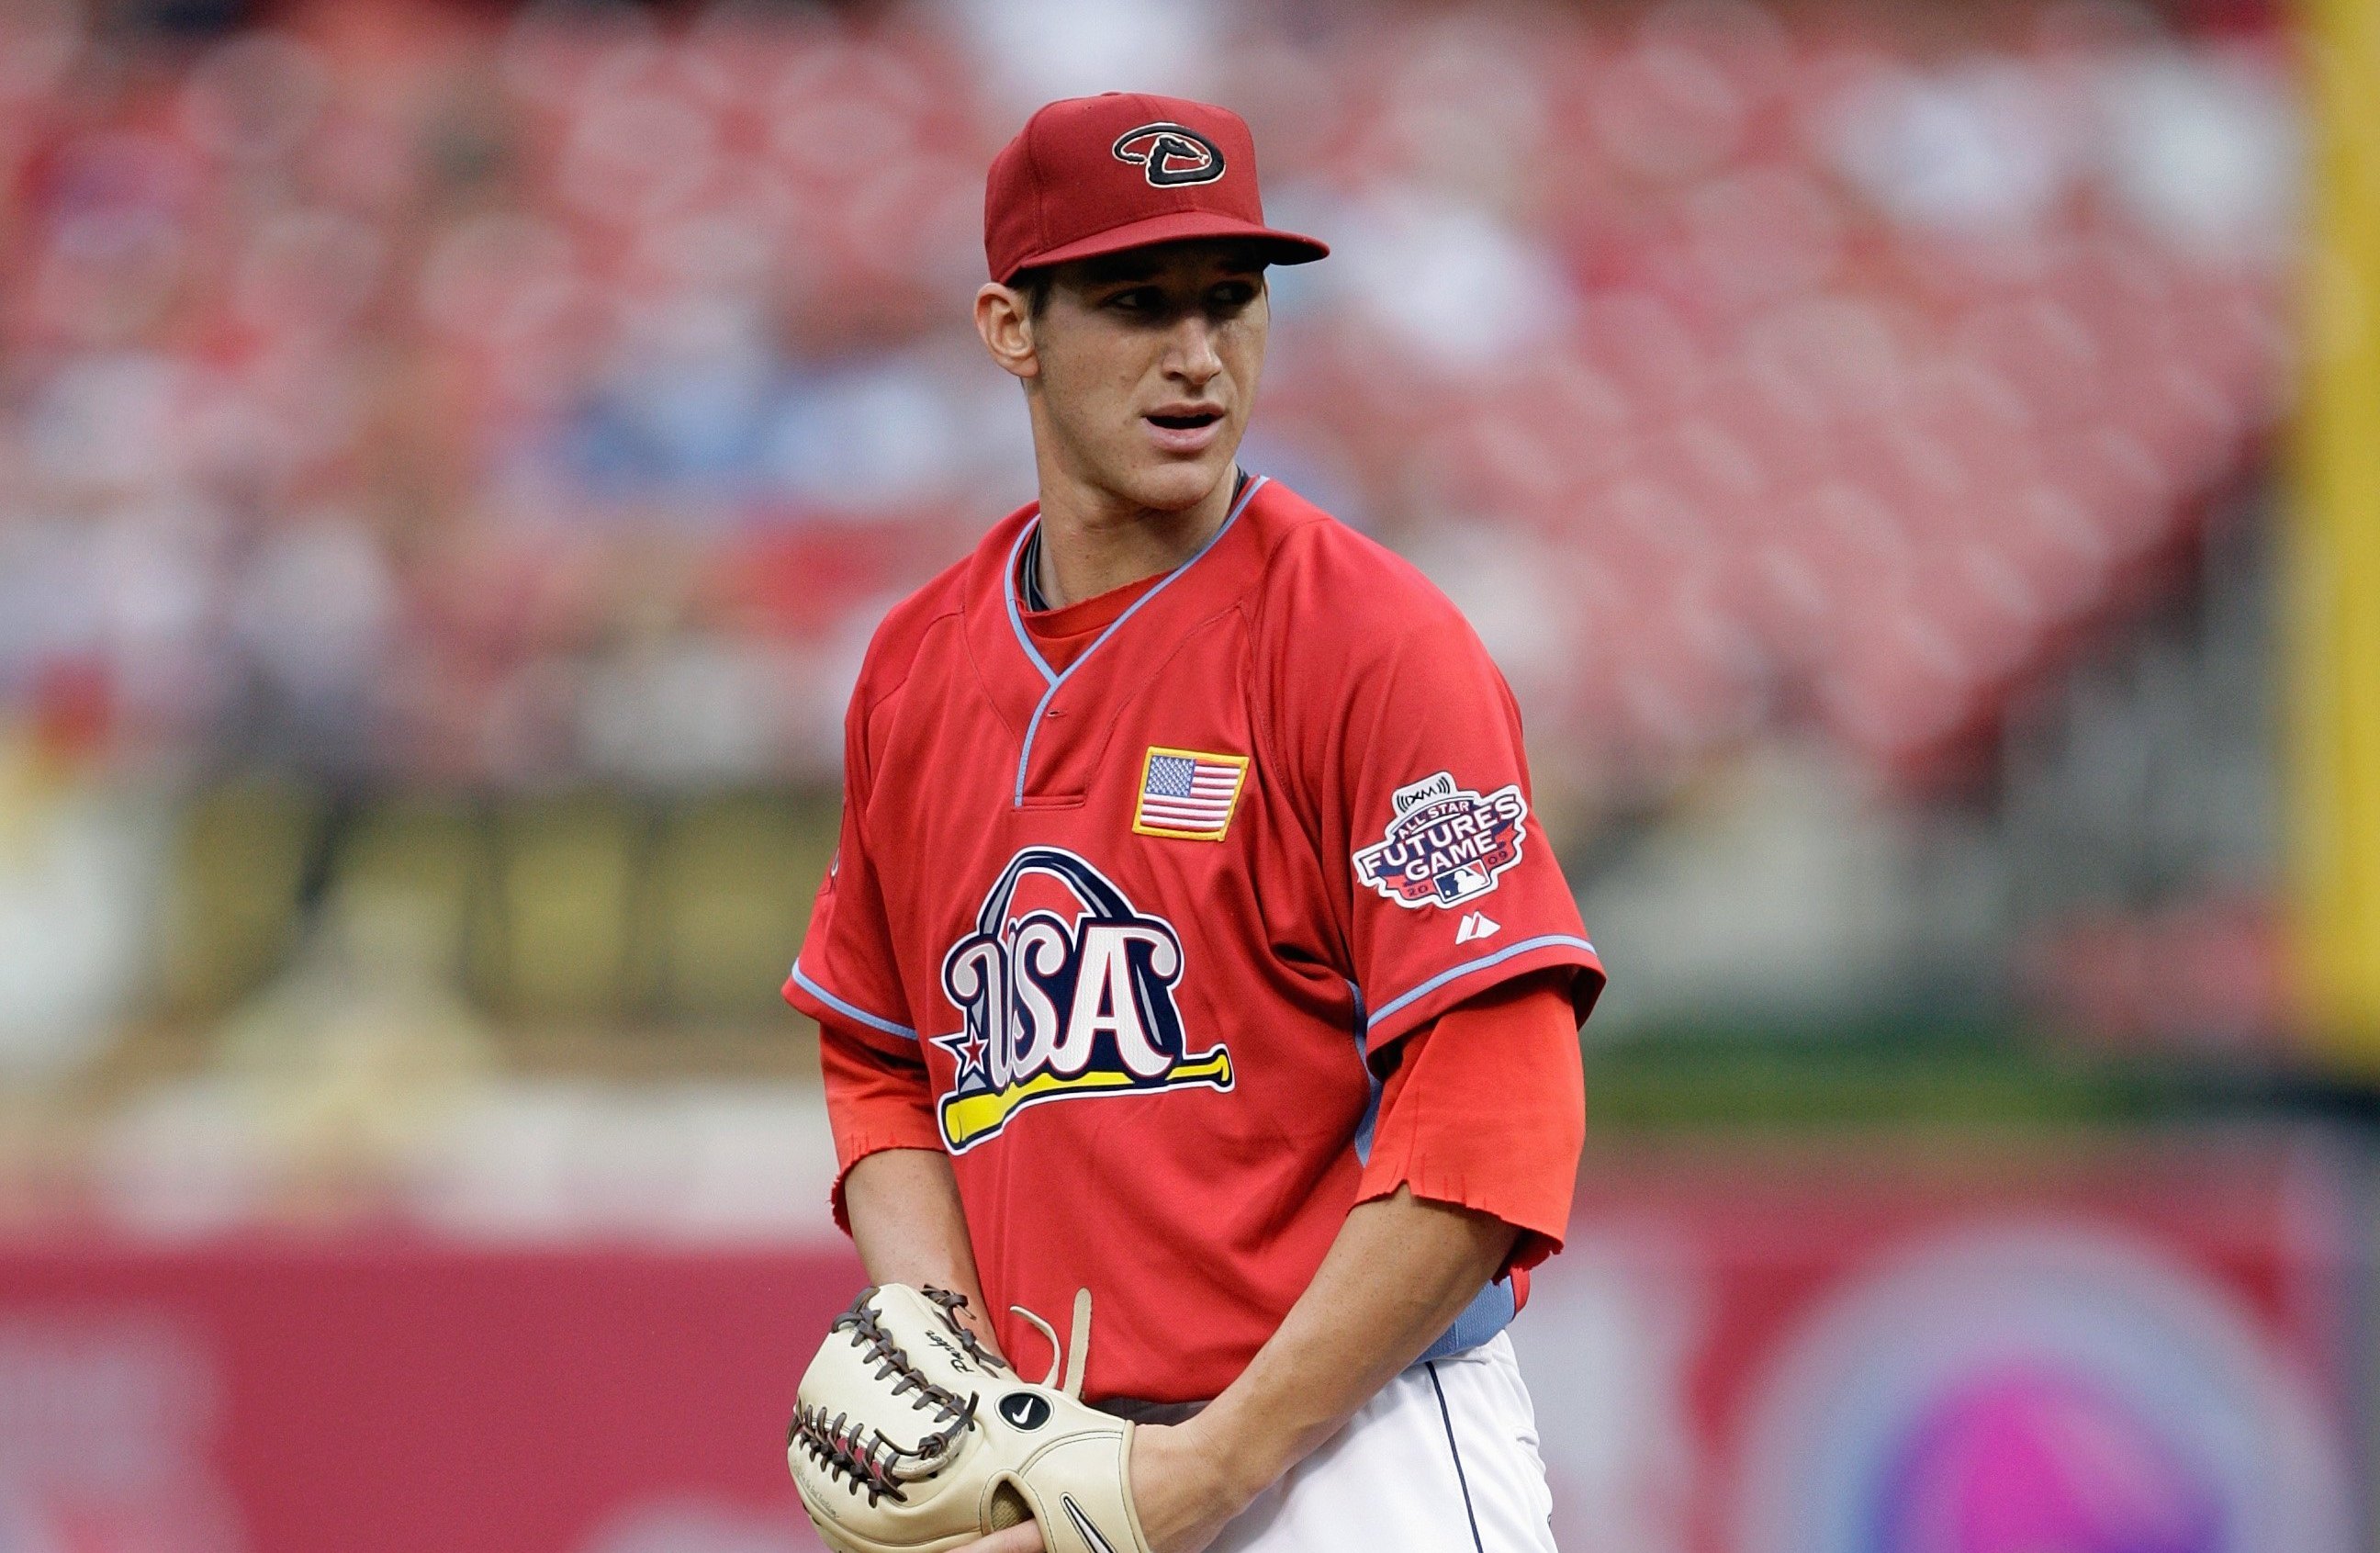 Slideshow: 2014 MLB Futures Game players when they were in high school